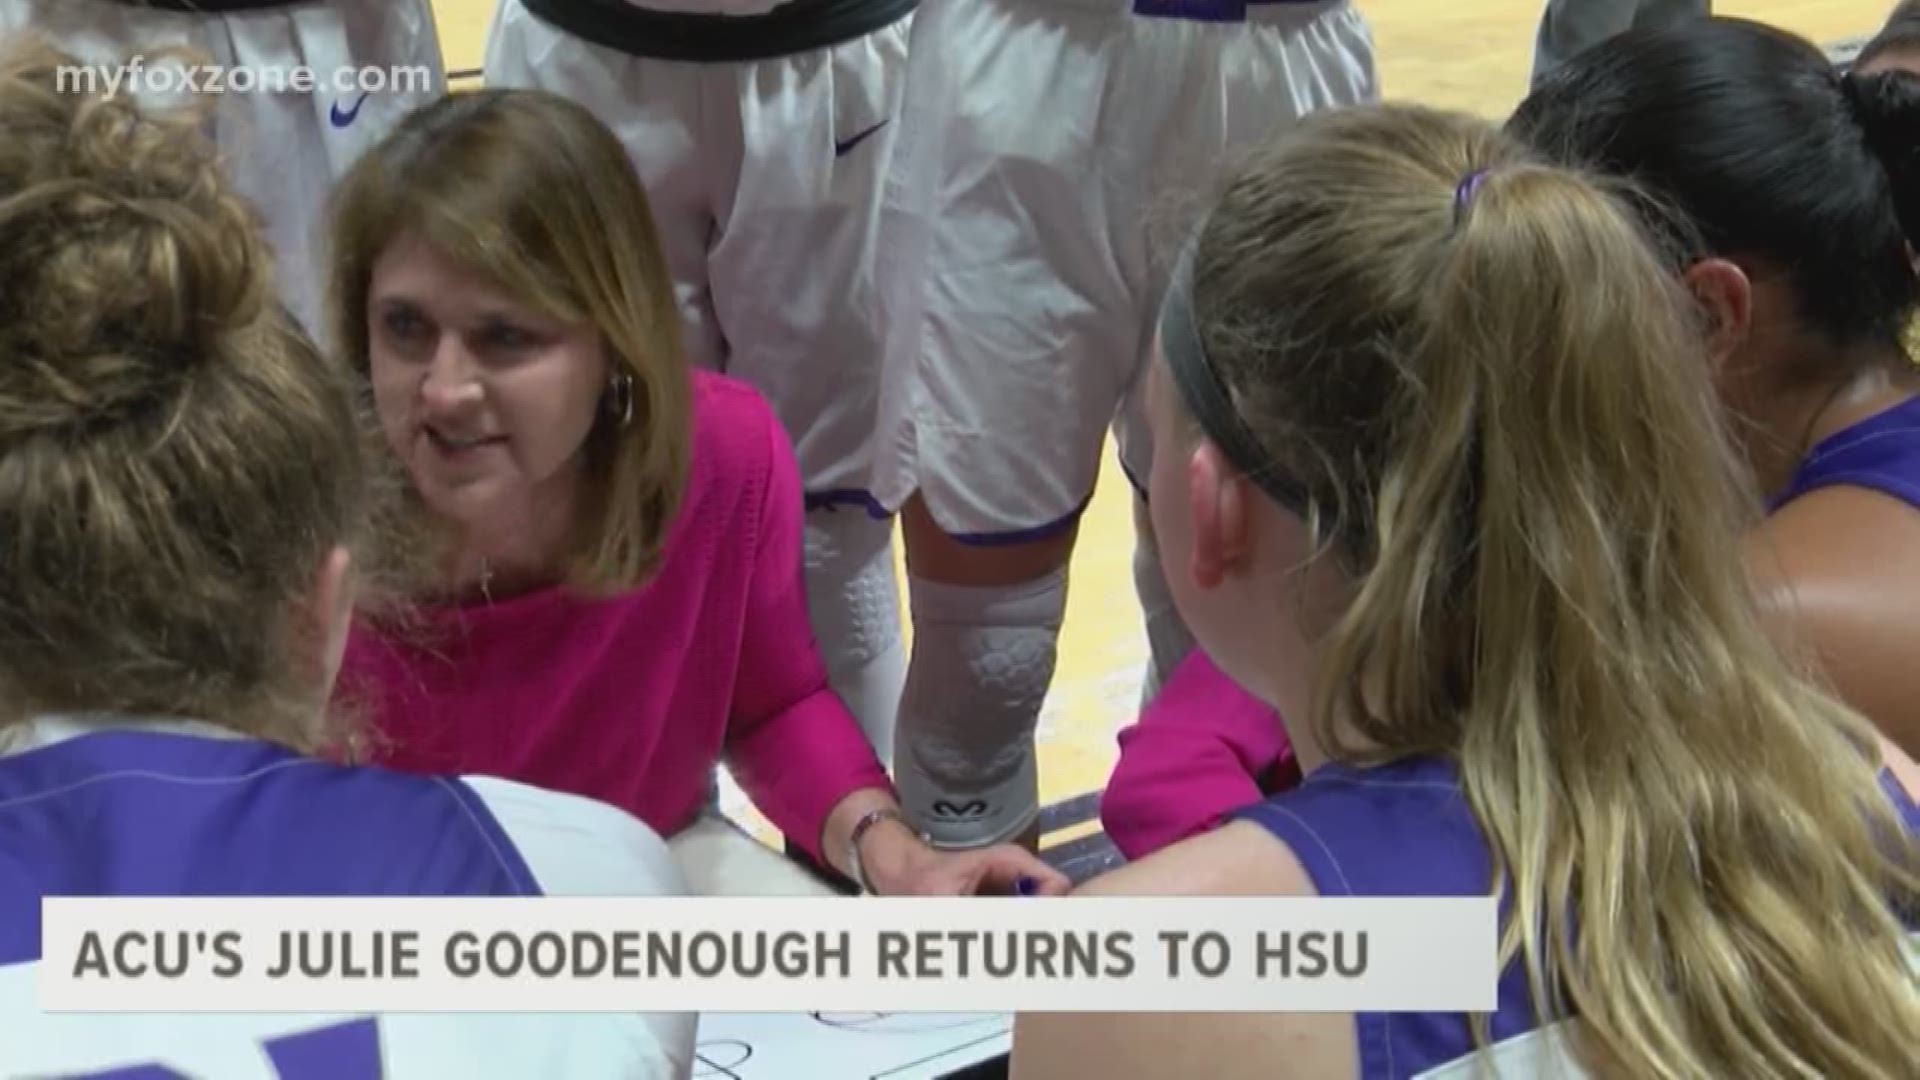 This Wednesday, ACU will play a conference game at Hardin-Simmons, the place where Julie Goodenough coached for almost a decade. For Coach Goodenough, it'll be a special walk down memory lane.